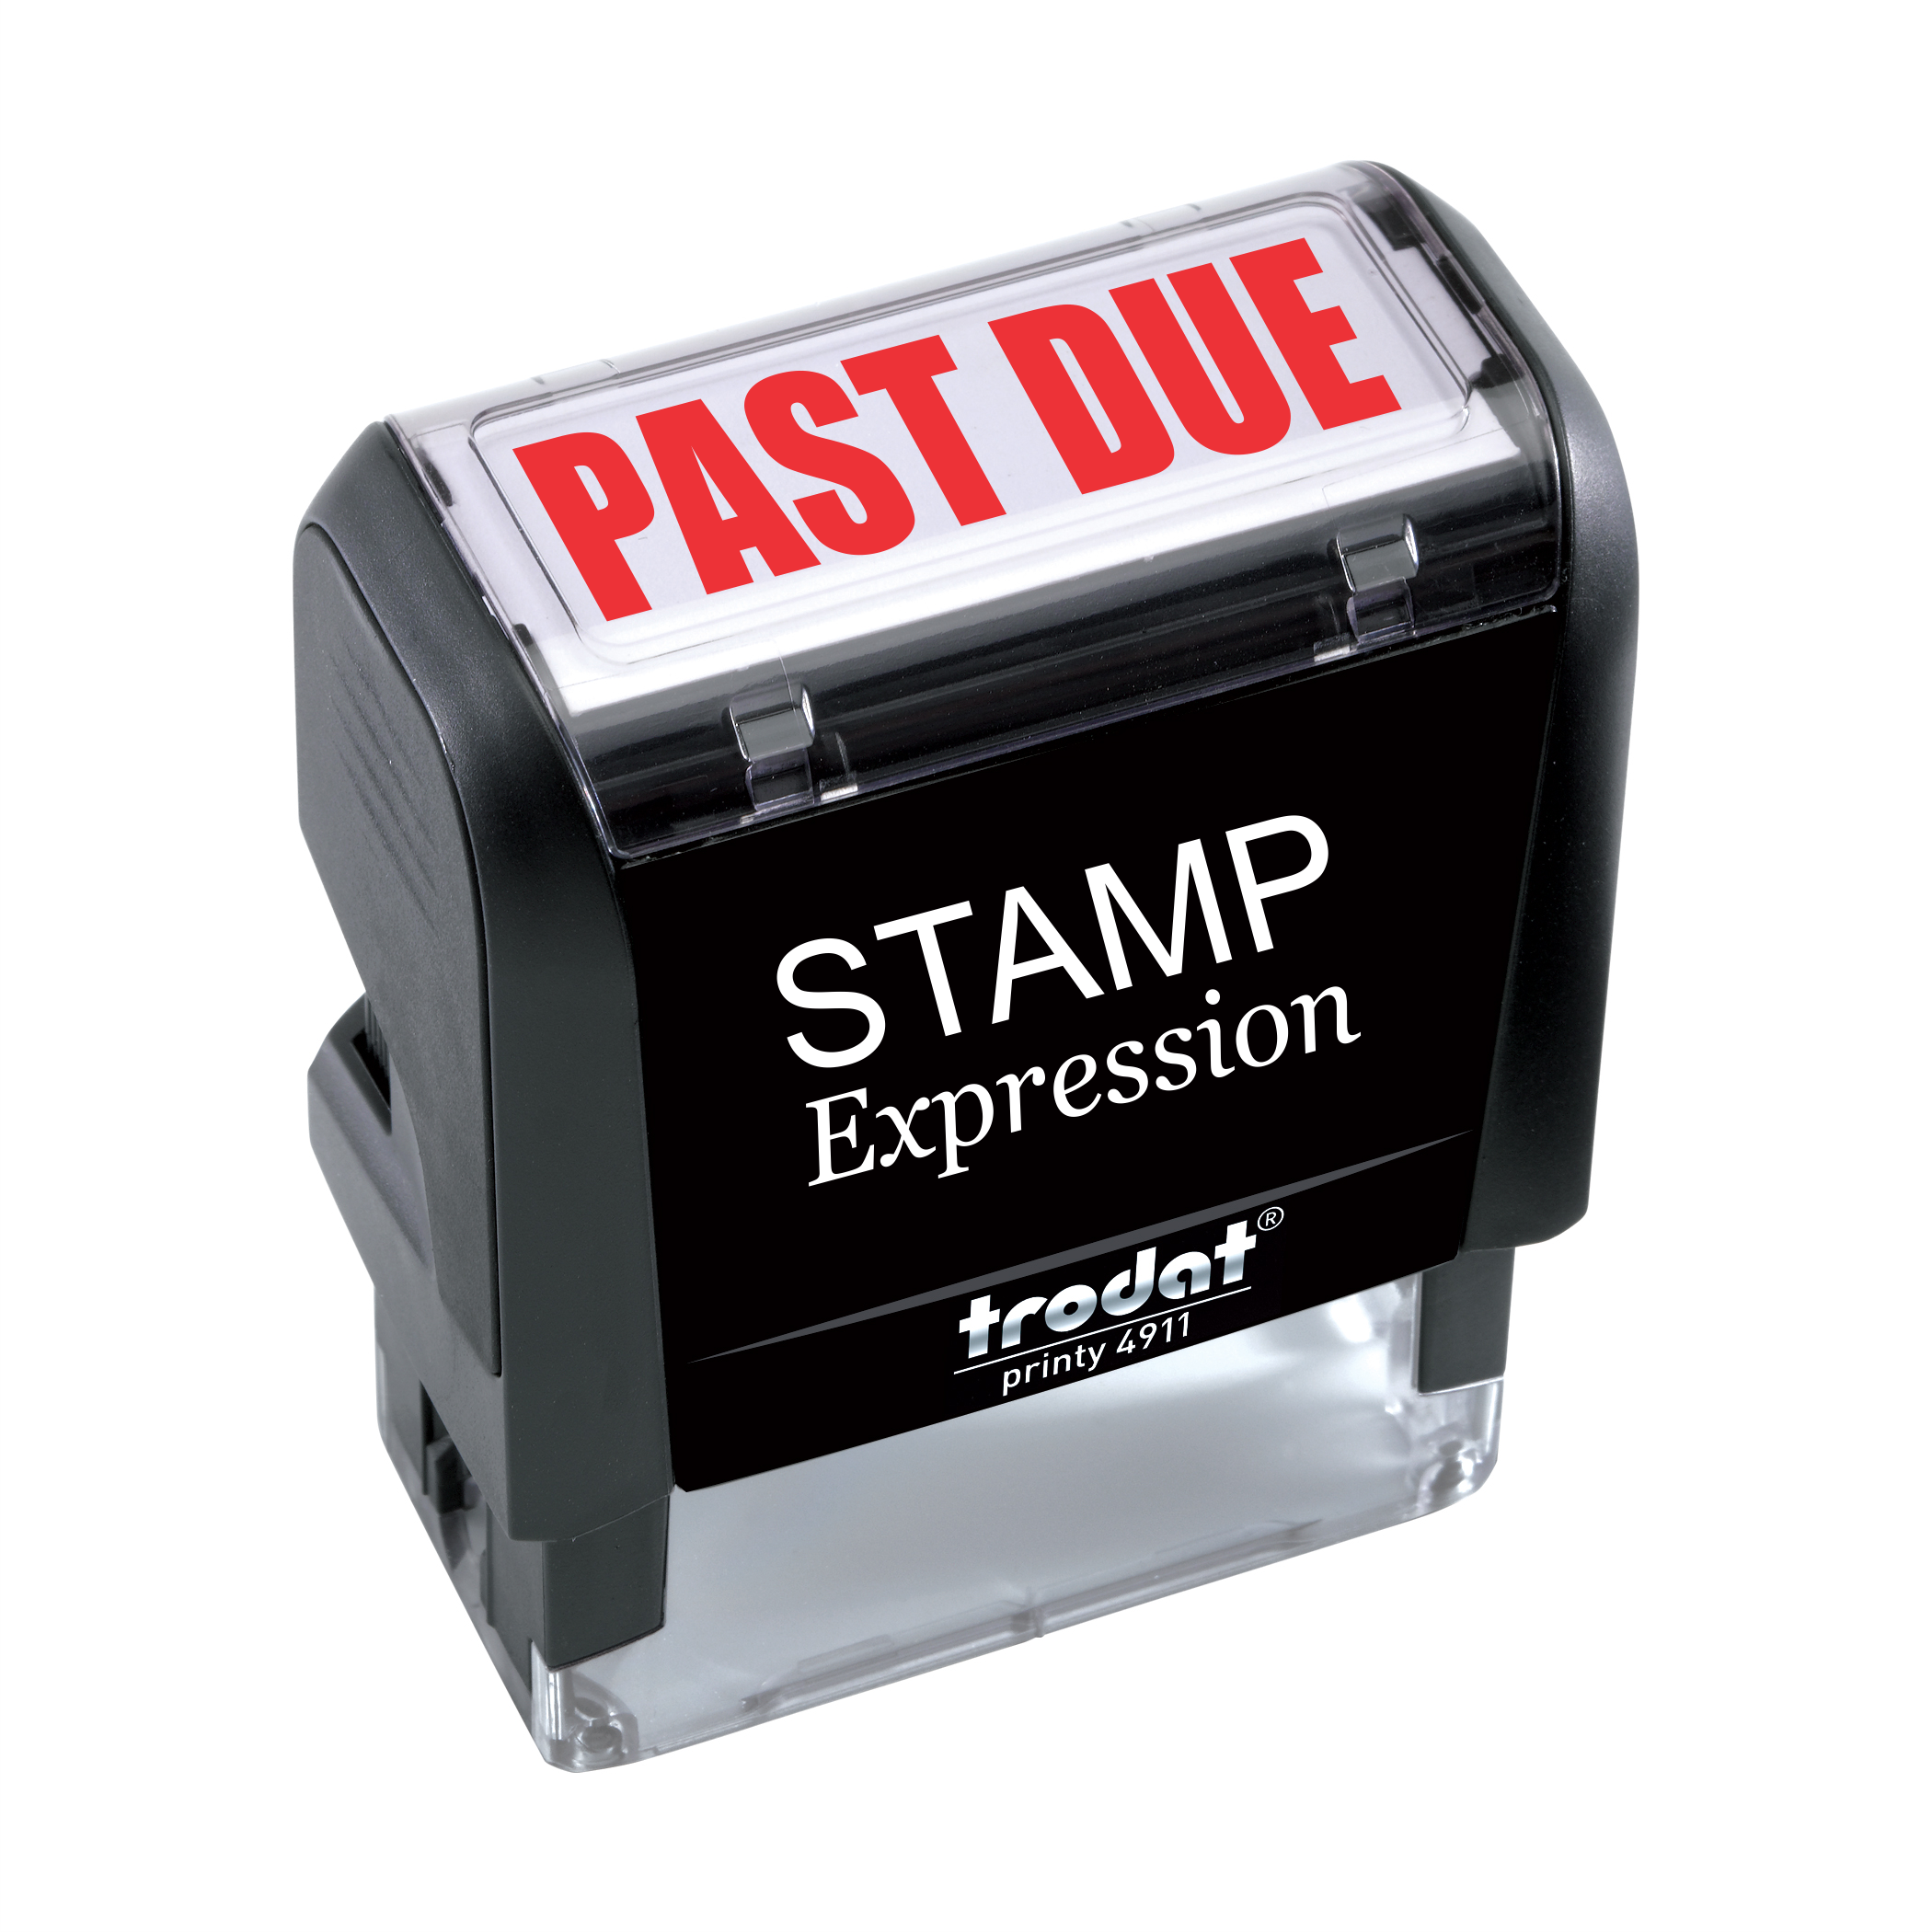 Past Due Office Self Inking Rubber Stamp